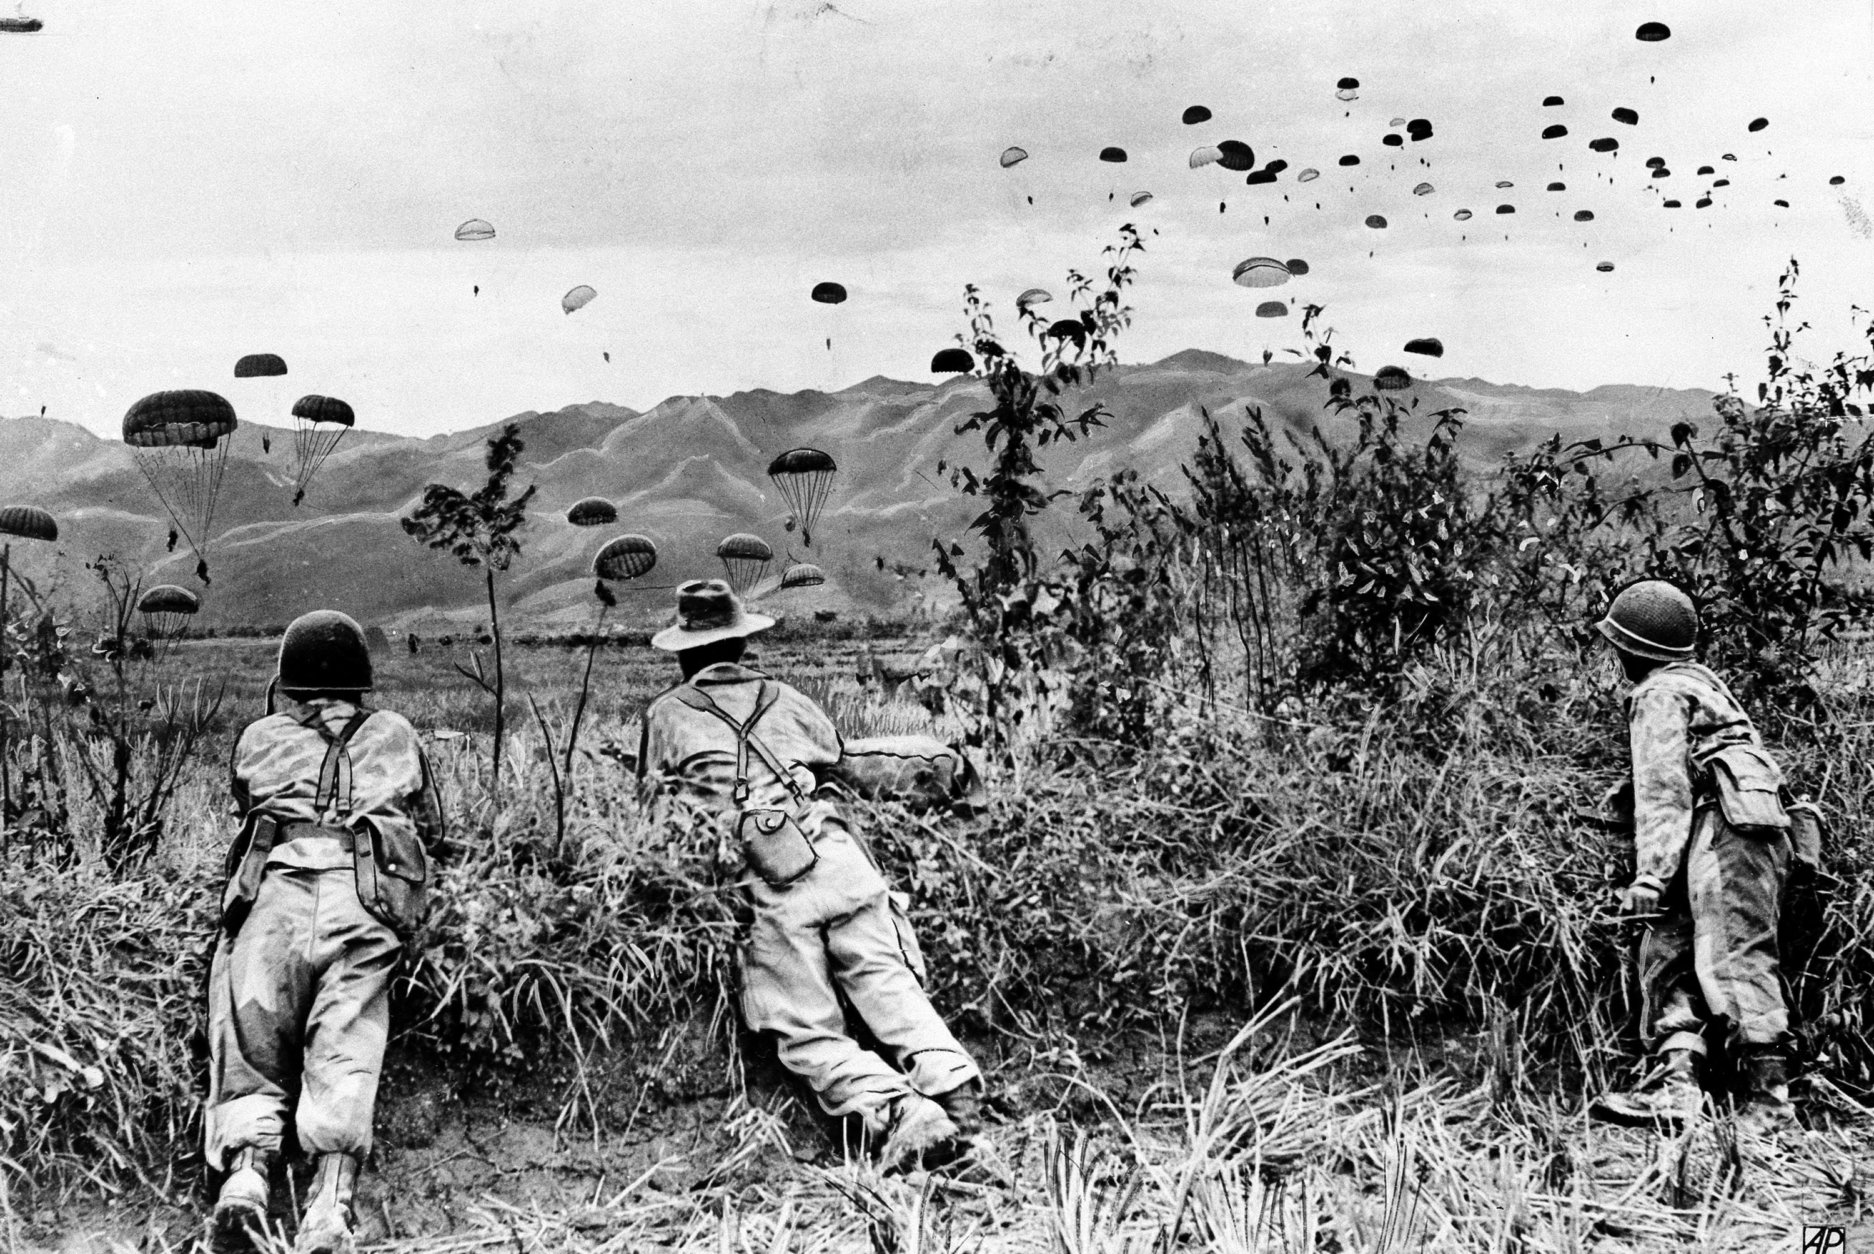 The first landed paratroopers of the French-Indochinese Union army have a watchful eye on the descent of their comrades, as Operation Castor gets under way, on November 20, 1953, in the hill tops district northwest of Hanoi . Several paratrooper units are launched in a campaign to strenghten the garrison of Dien Bien Phu. (AP Photo)